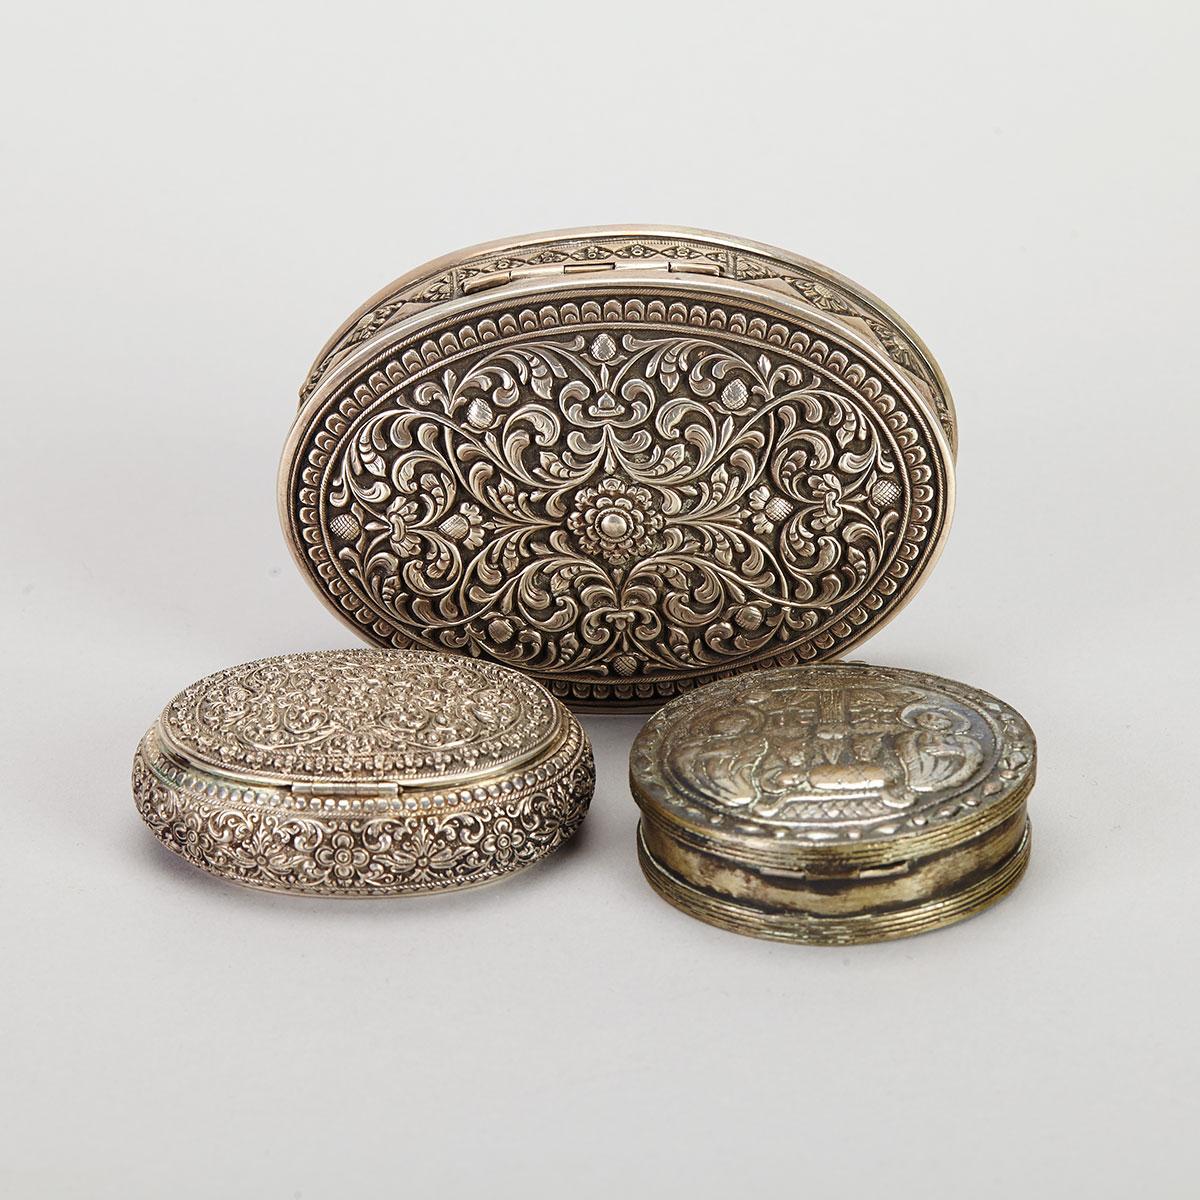 Two Silver Boxes, South Asia, 19th Century